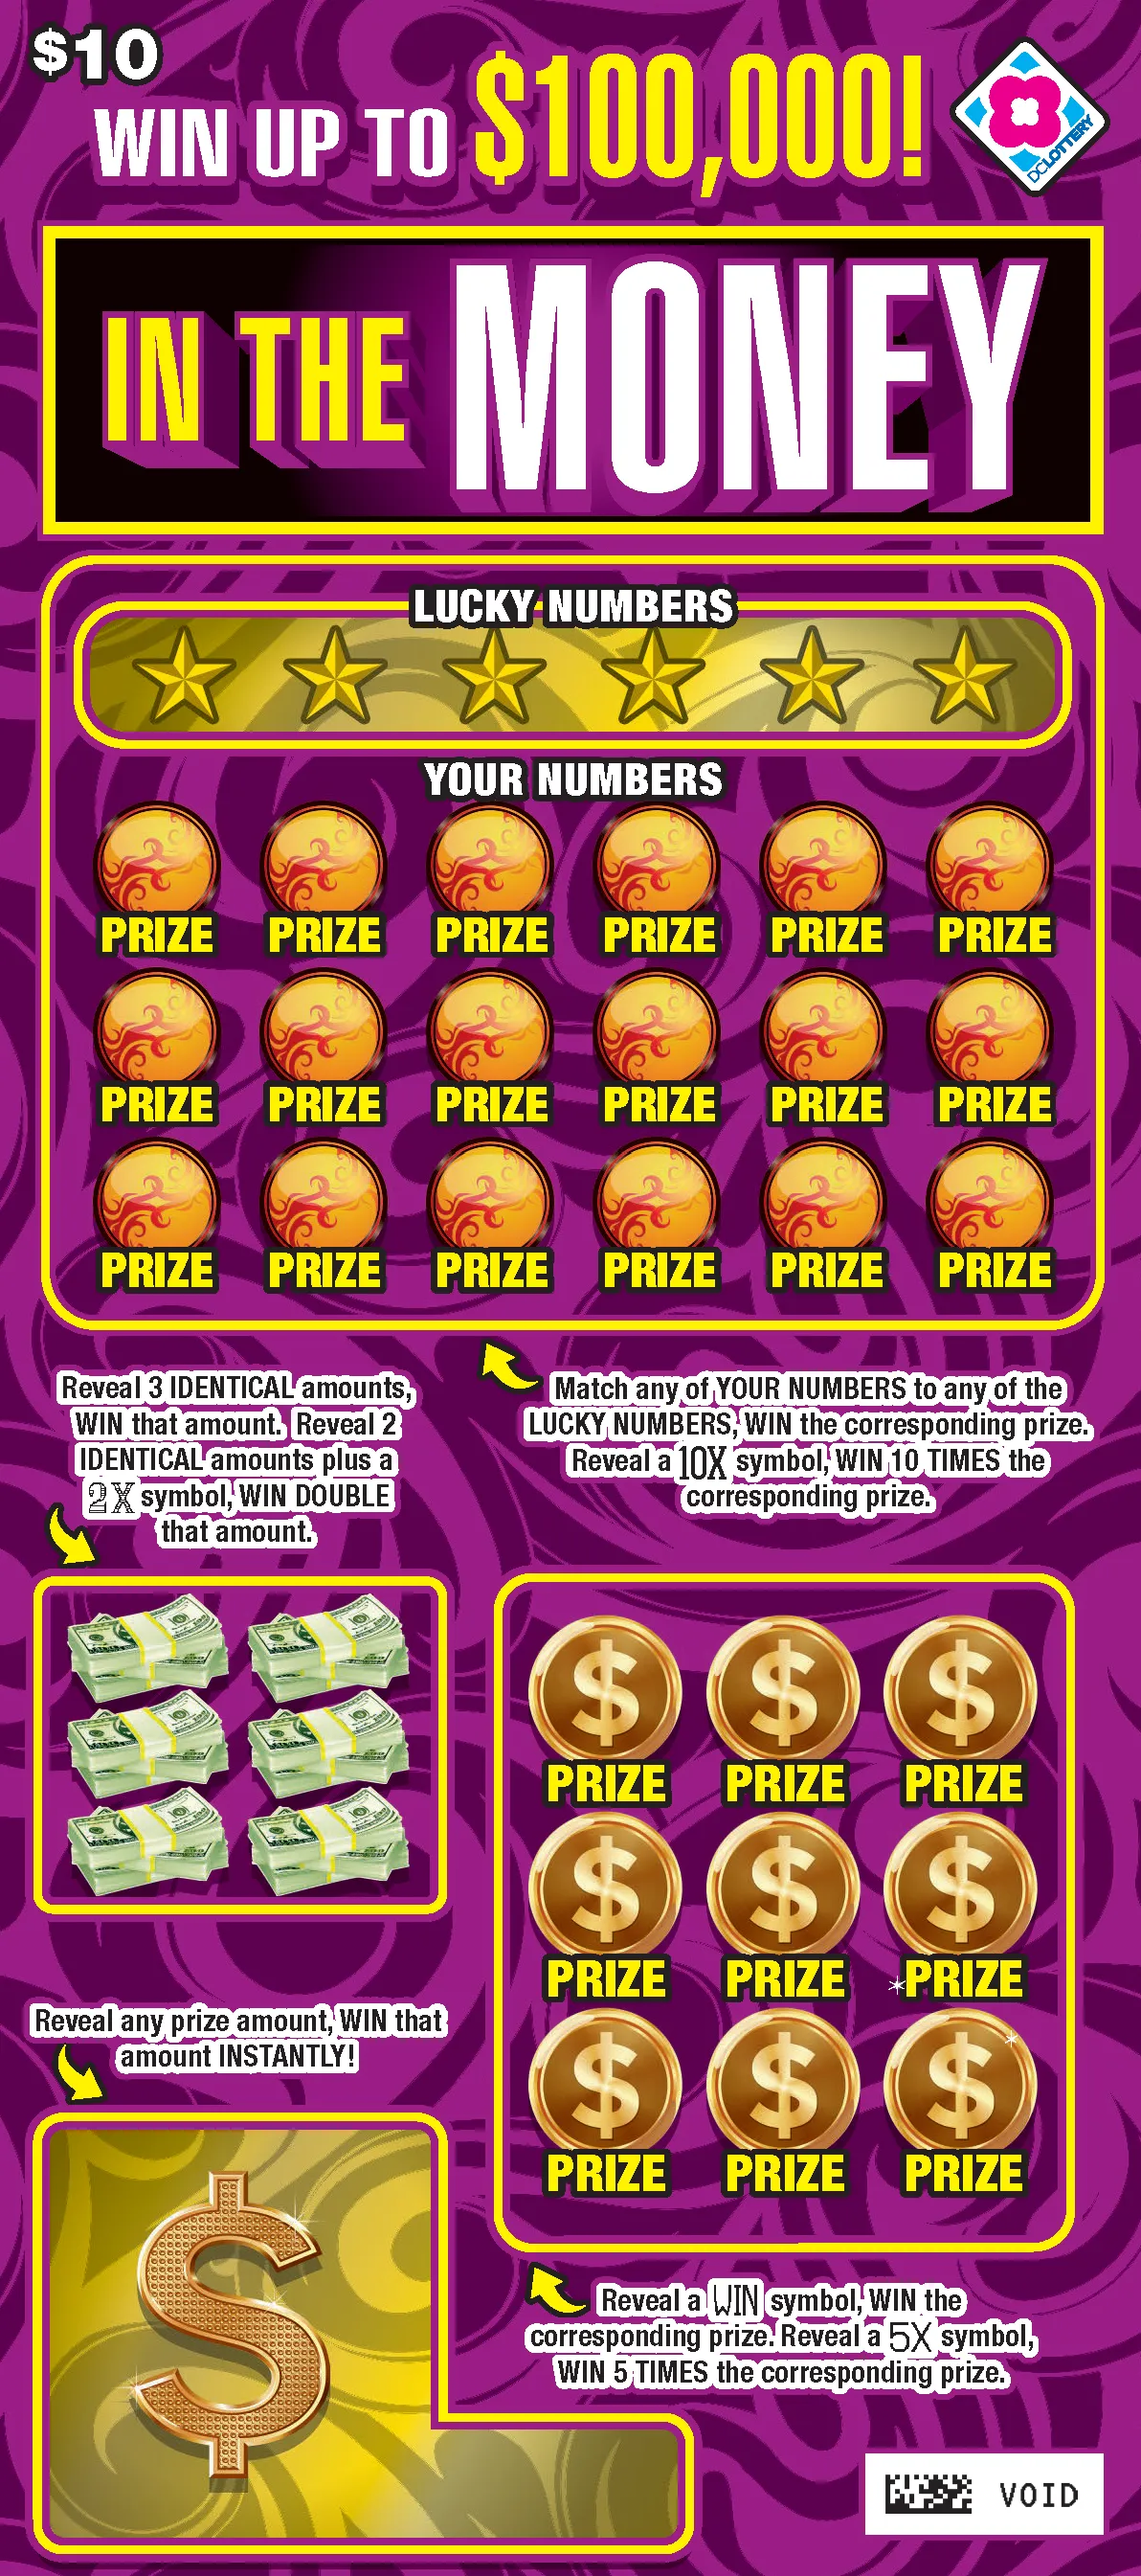 Prizes And Odds  Delaware Lottery